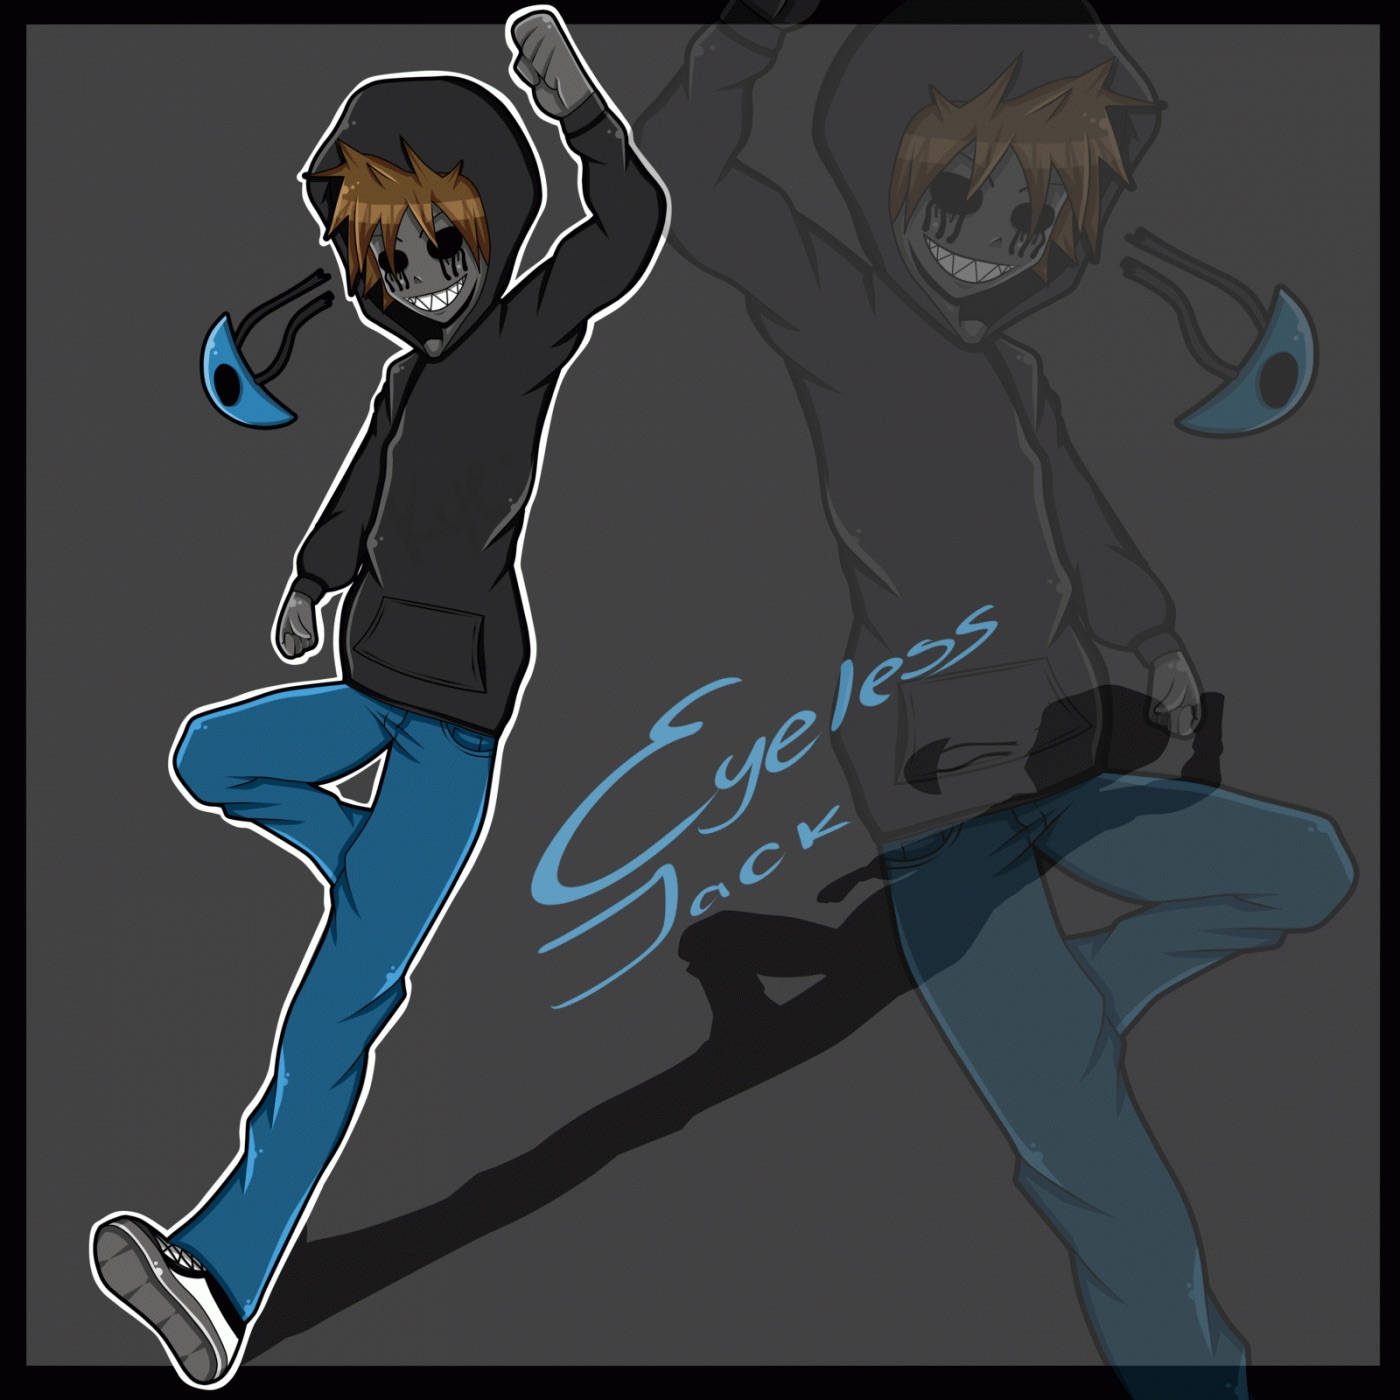 Eyeless Jack In Signature Blue Pants Lurking In The Darkness